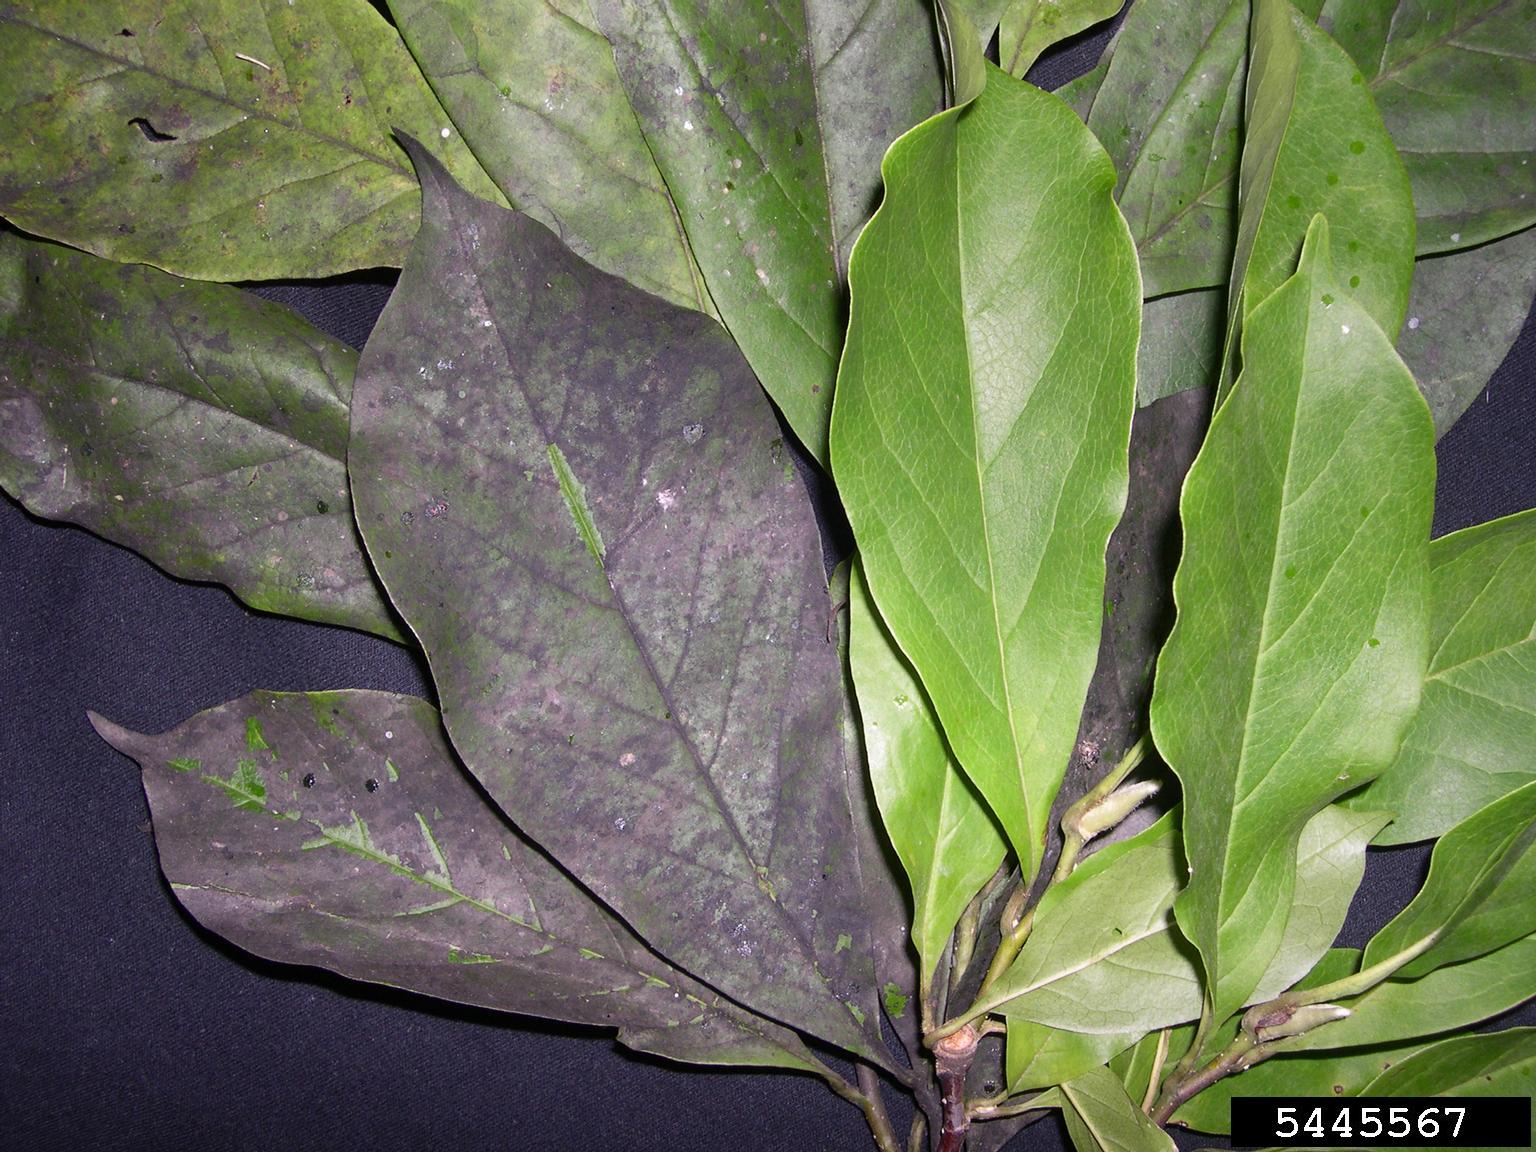 Healthy green magnolia leaves and brownish purple magnolia leaves infected with sooty mold.